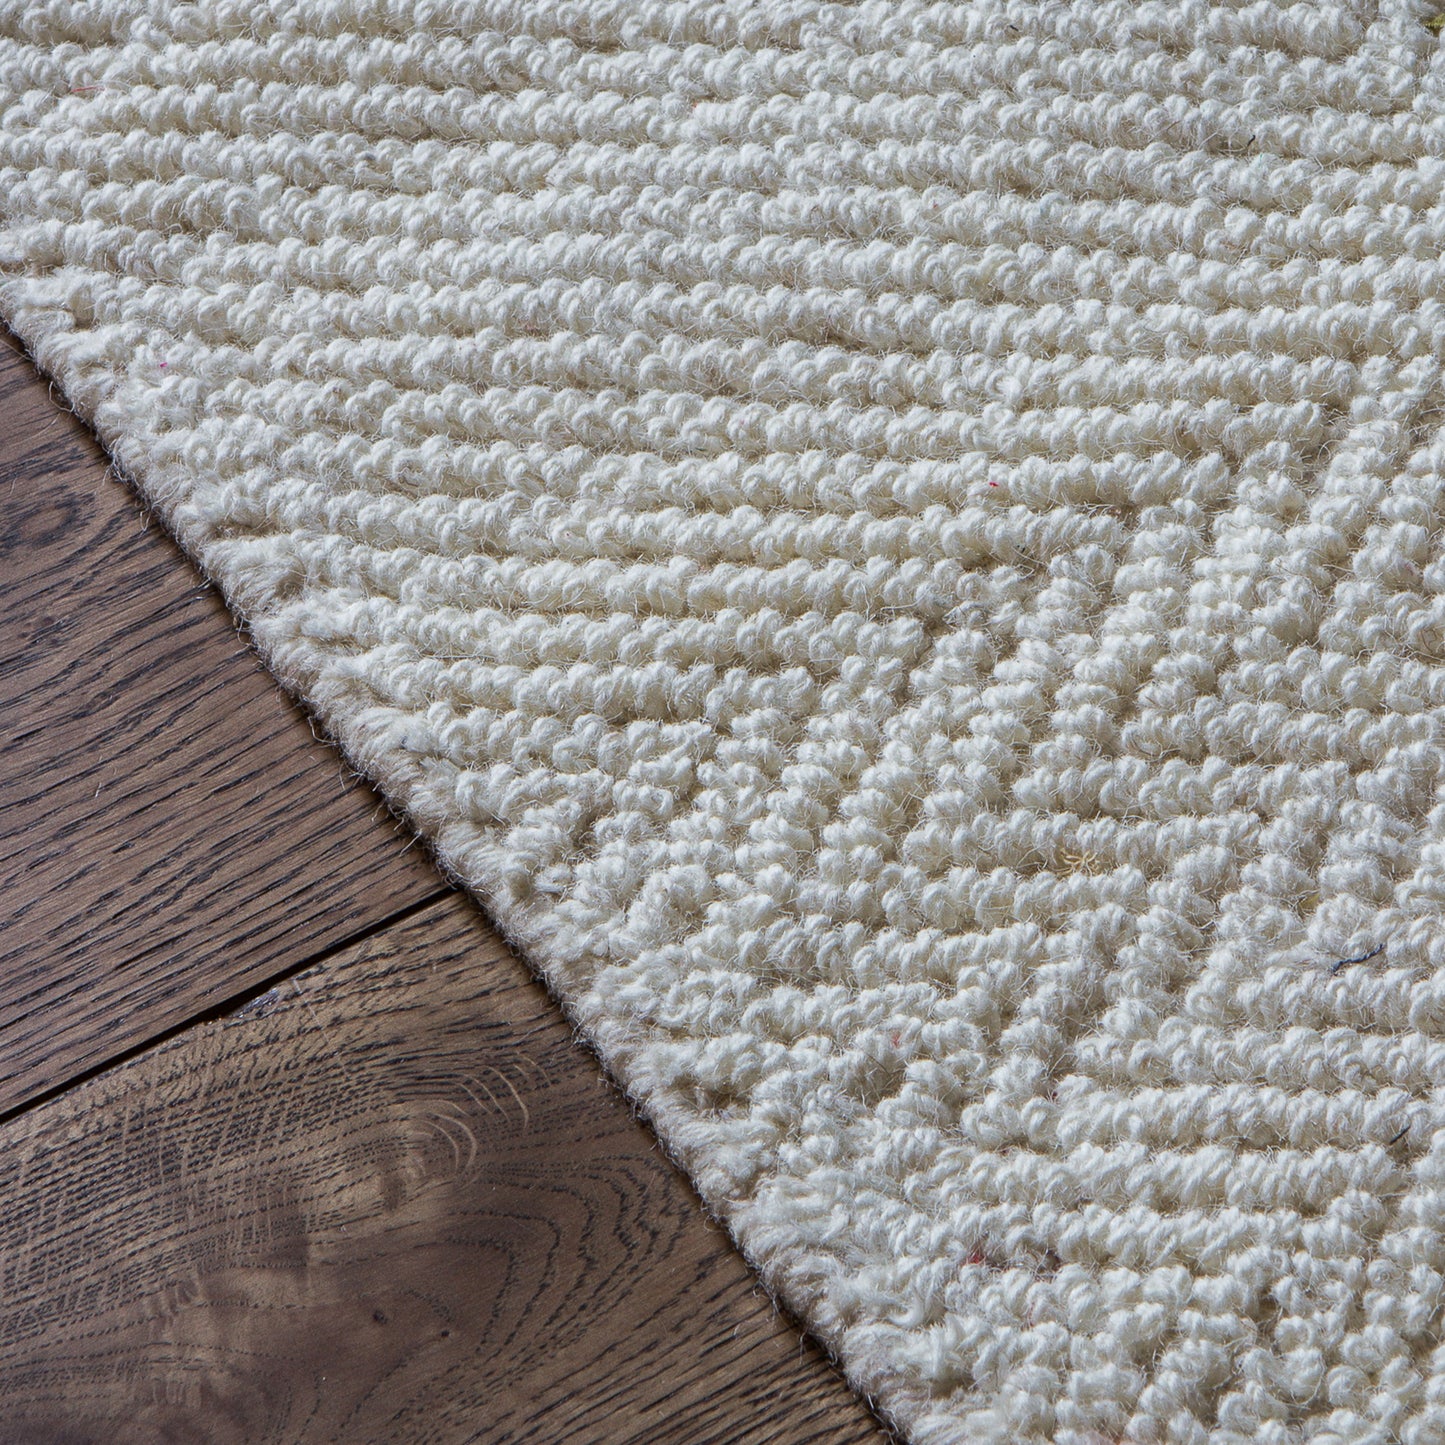 A Maydel Rug Cream 1600x2300mm, a home furniture, on a wooden floor from Kikiathome.co.uk.